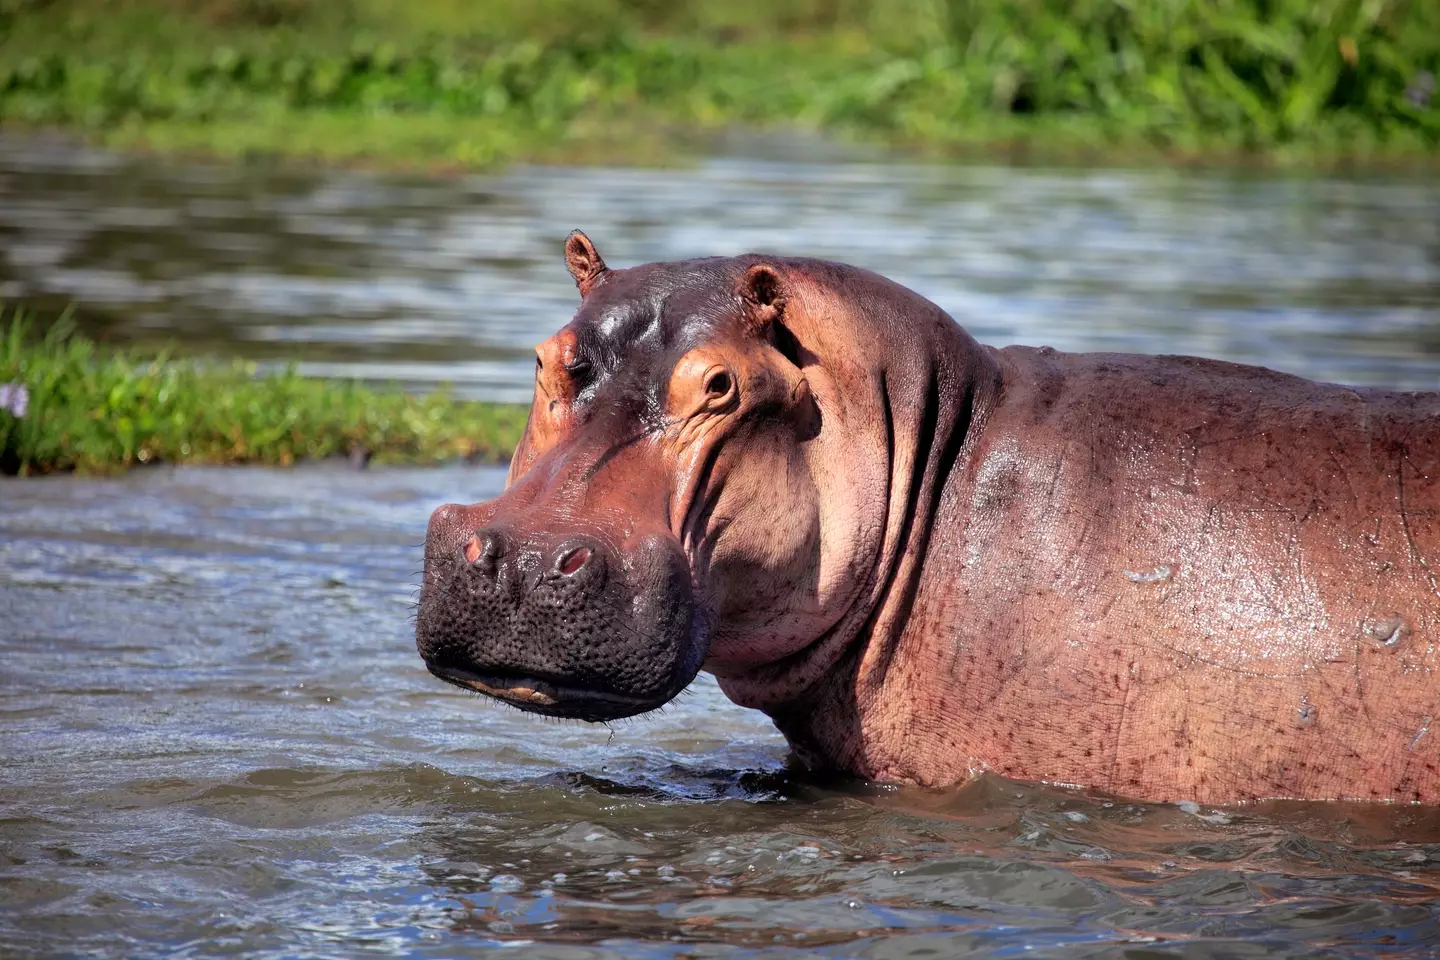 Hippos are large and dangerous despite being herbivores.